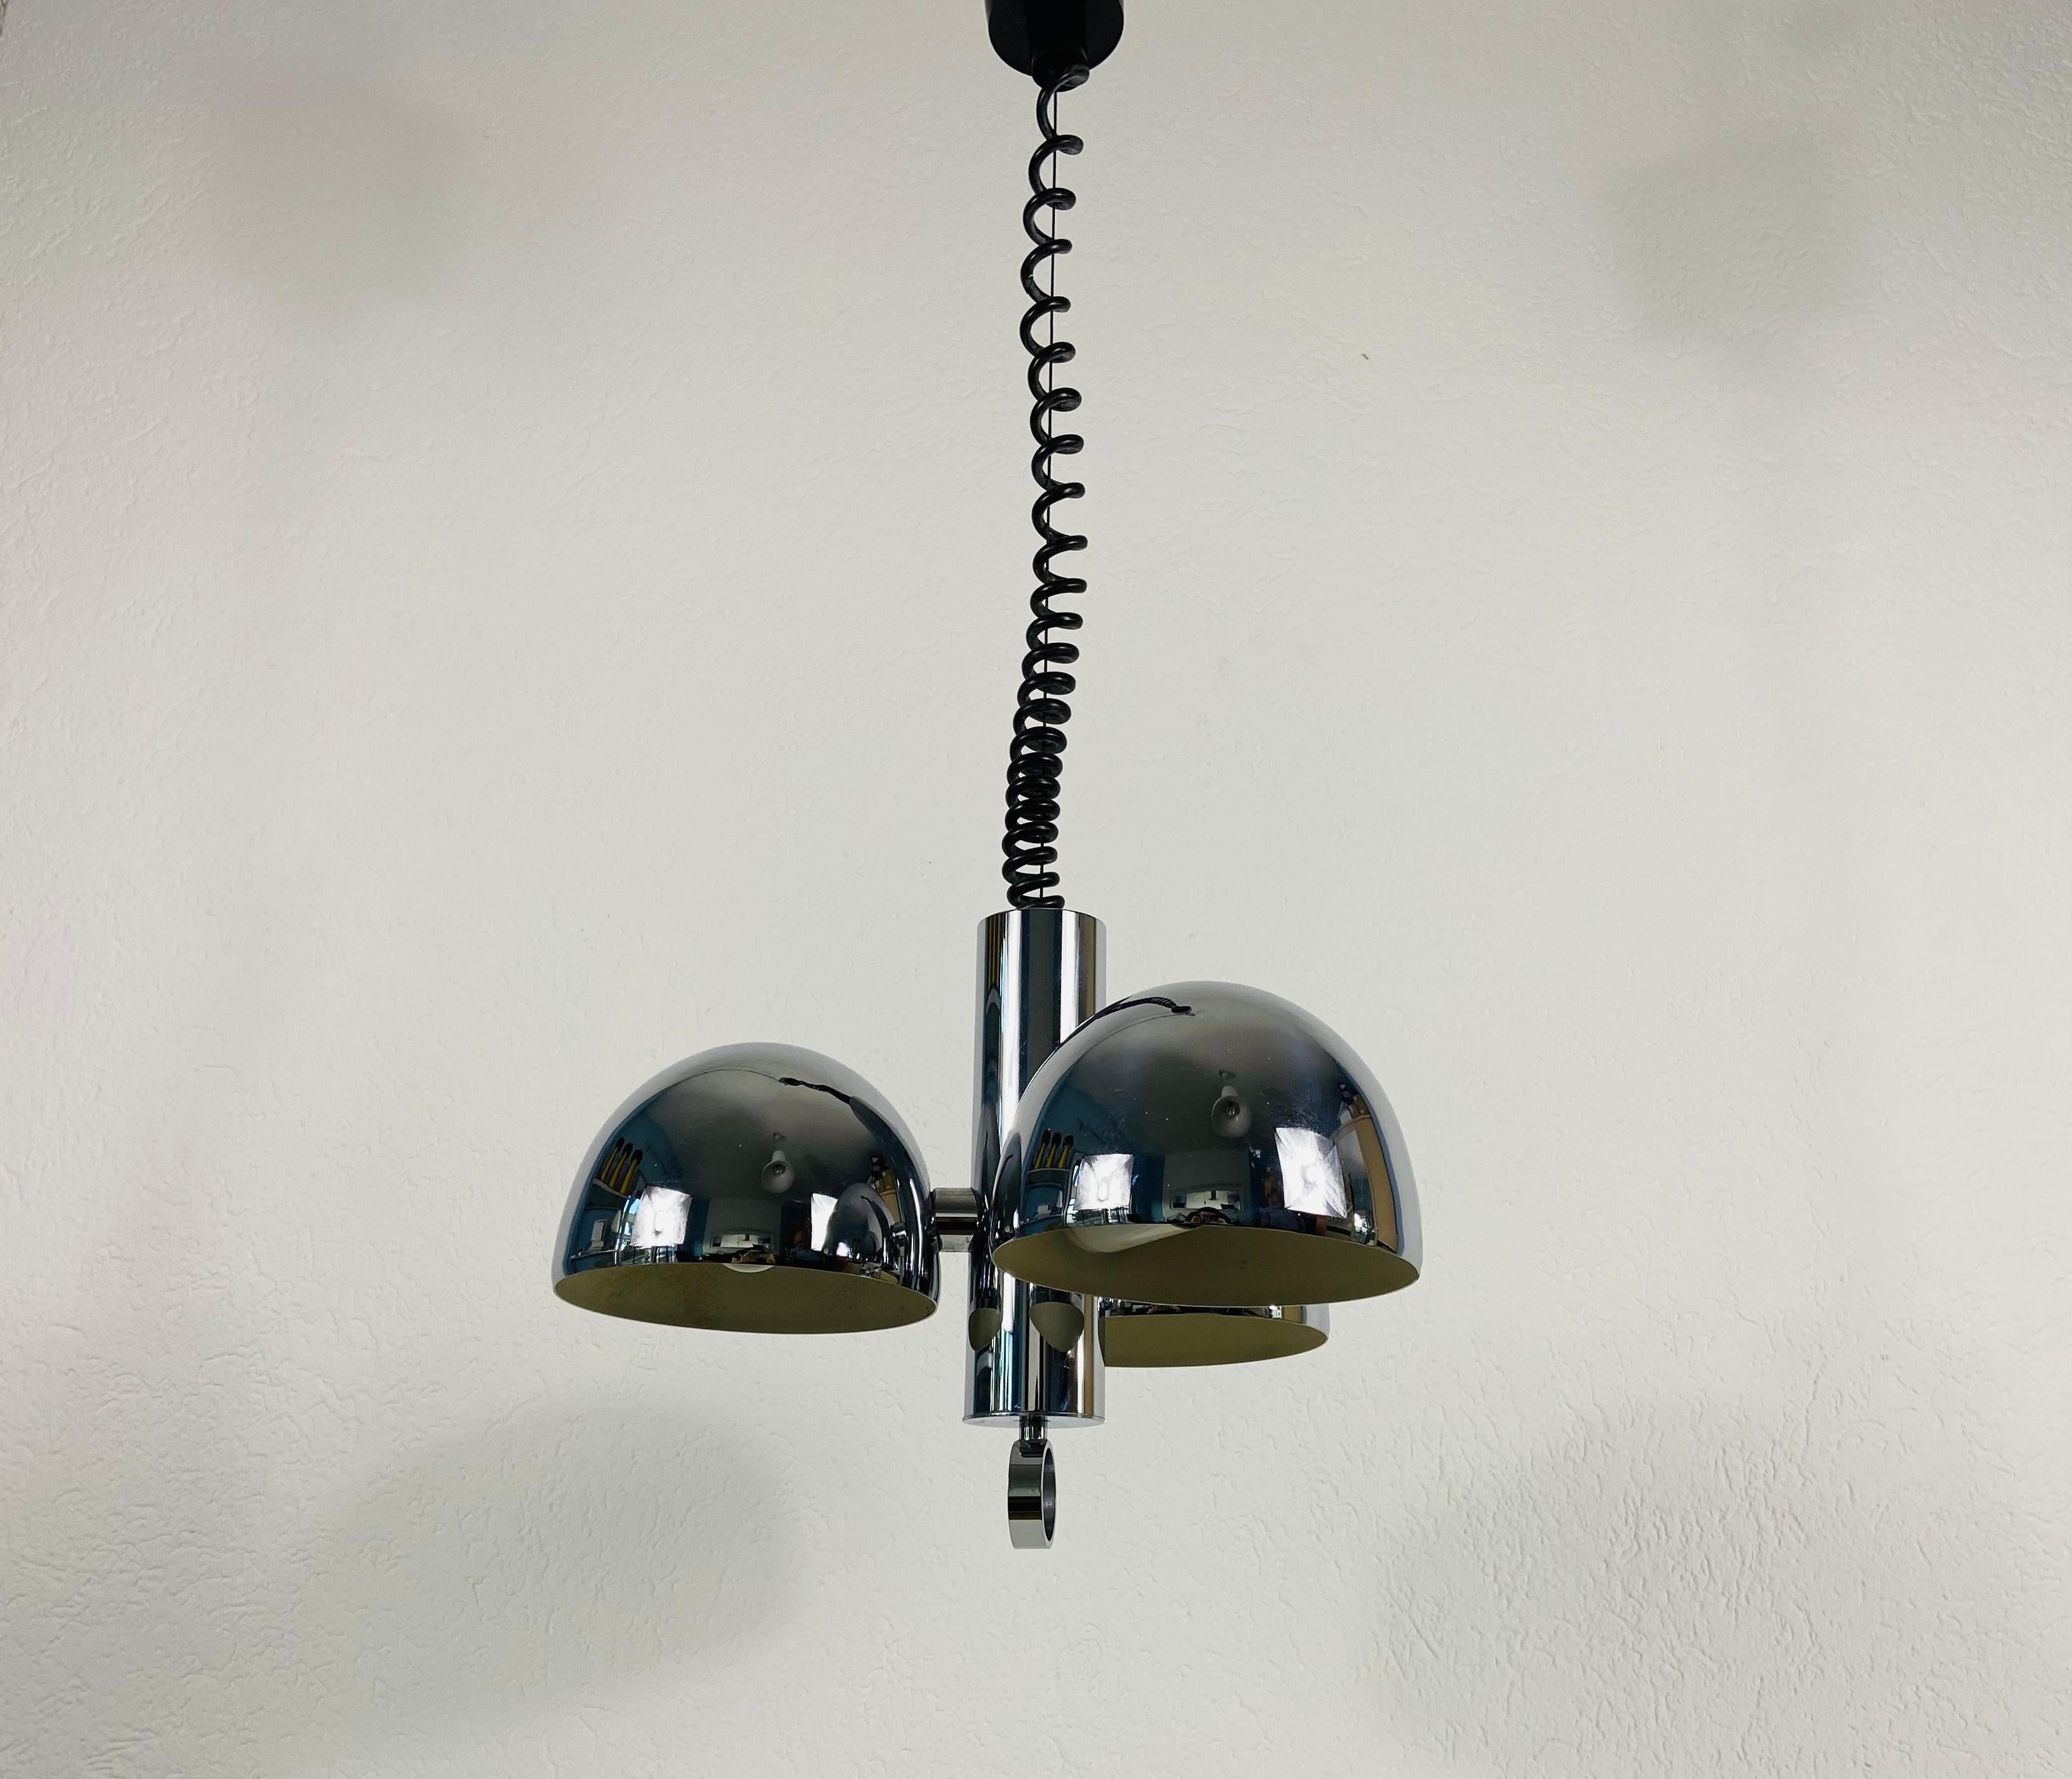 A midcentury chandelier made in the 1960s. It is fascinating with its Space Age design and 3 arms. The chrome circular body of the light is made of full aluminium, including the arms.

Measures: Max height 100 cm
Height of fixture 34 cm
Diameter